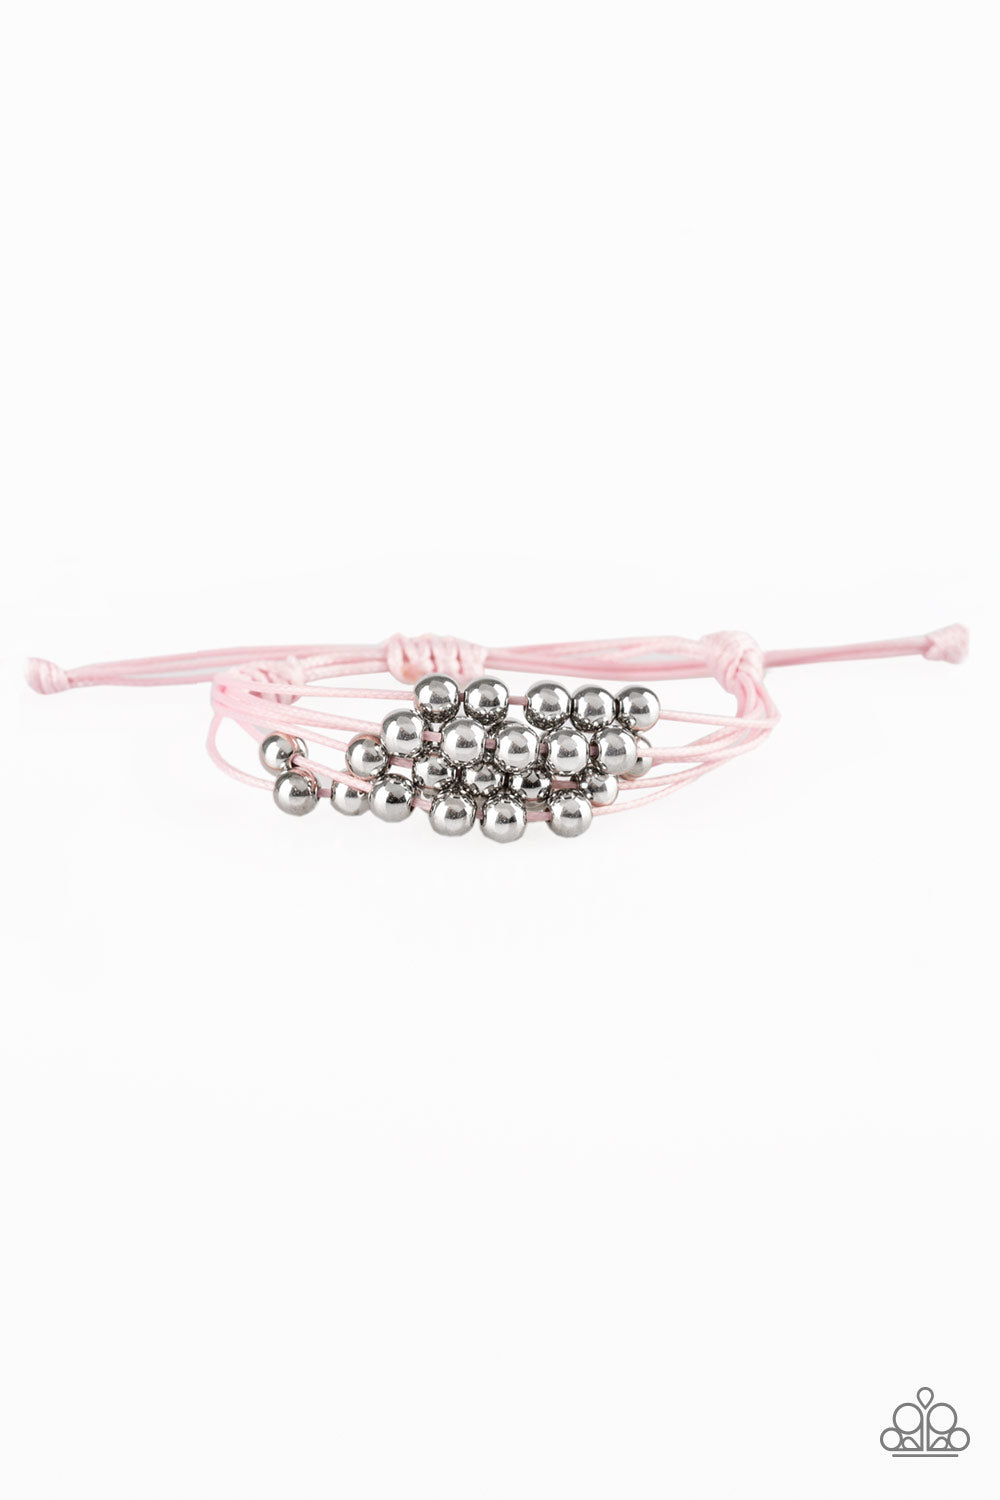 Without Skipping A BEAD - Paparazzi - Pink Cord Silver Bead Sliding Knot Bracelet